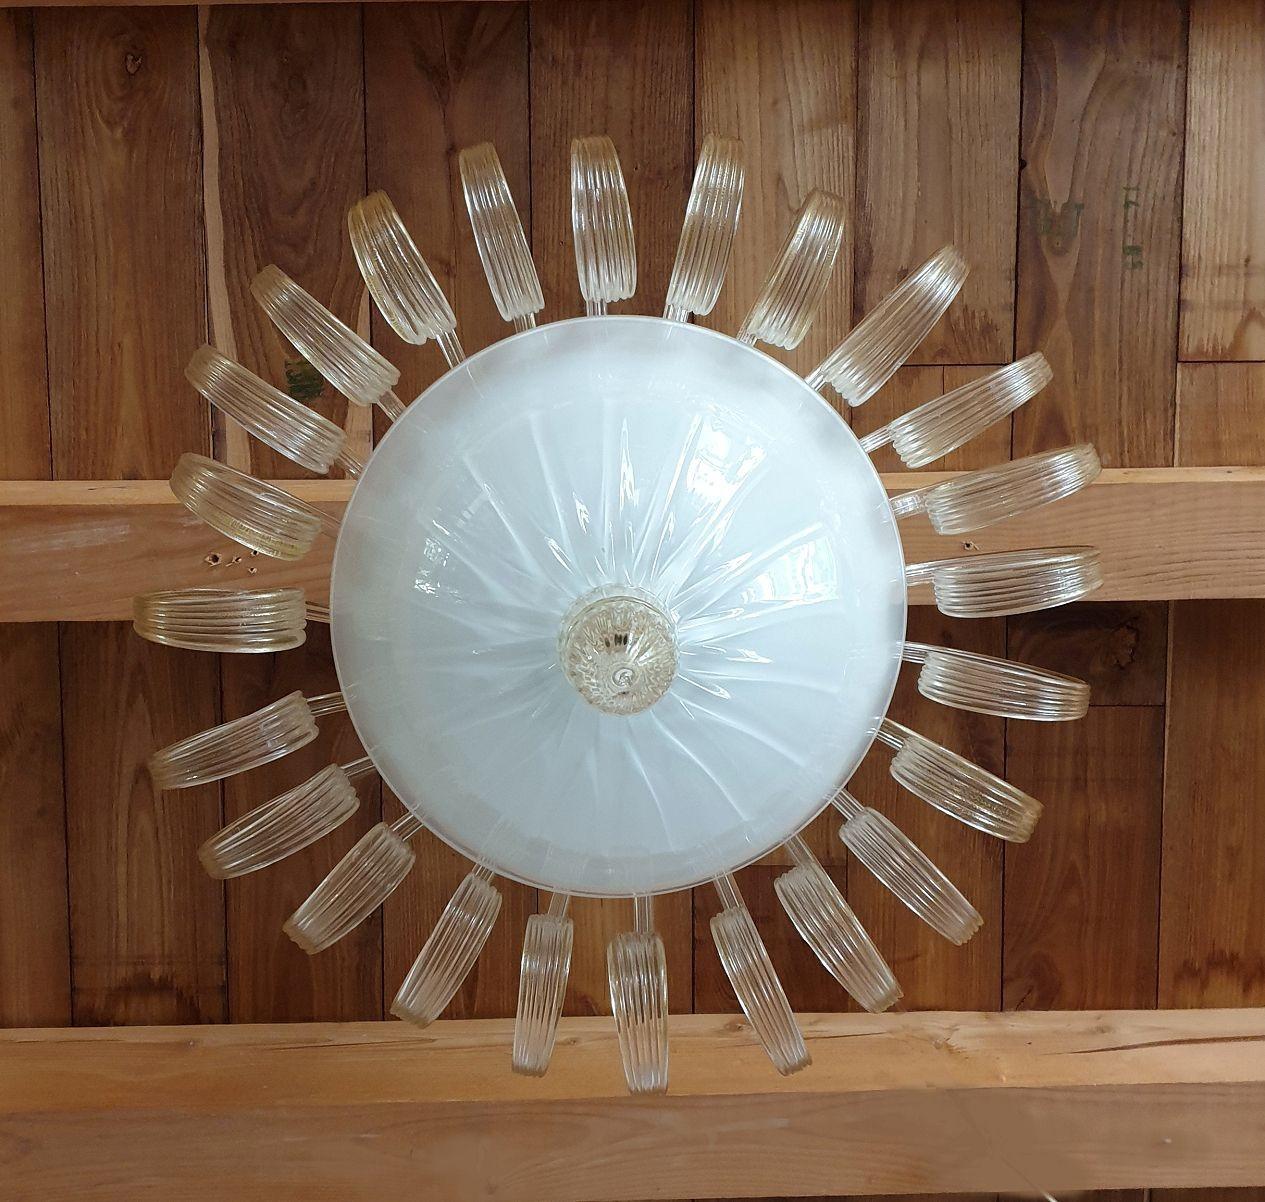 Neoclassical style hand blown Murano glass flush mount chandelier, attributed to Venini, Italy 1970s.
This beautiful quality chandelier is made of clear with gold leaf decor twisted leaves, a white central bowl nesting the lights, with gold painted